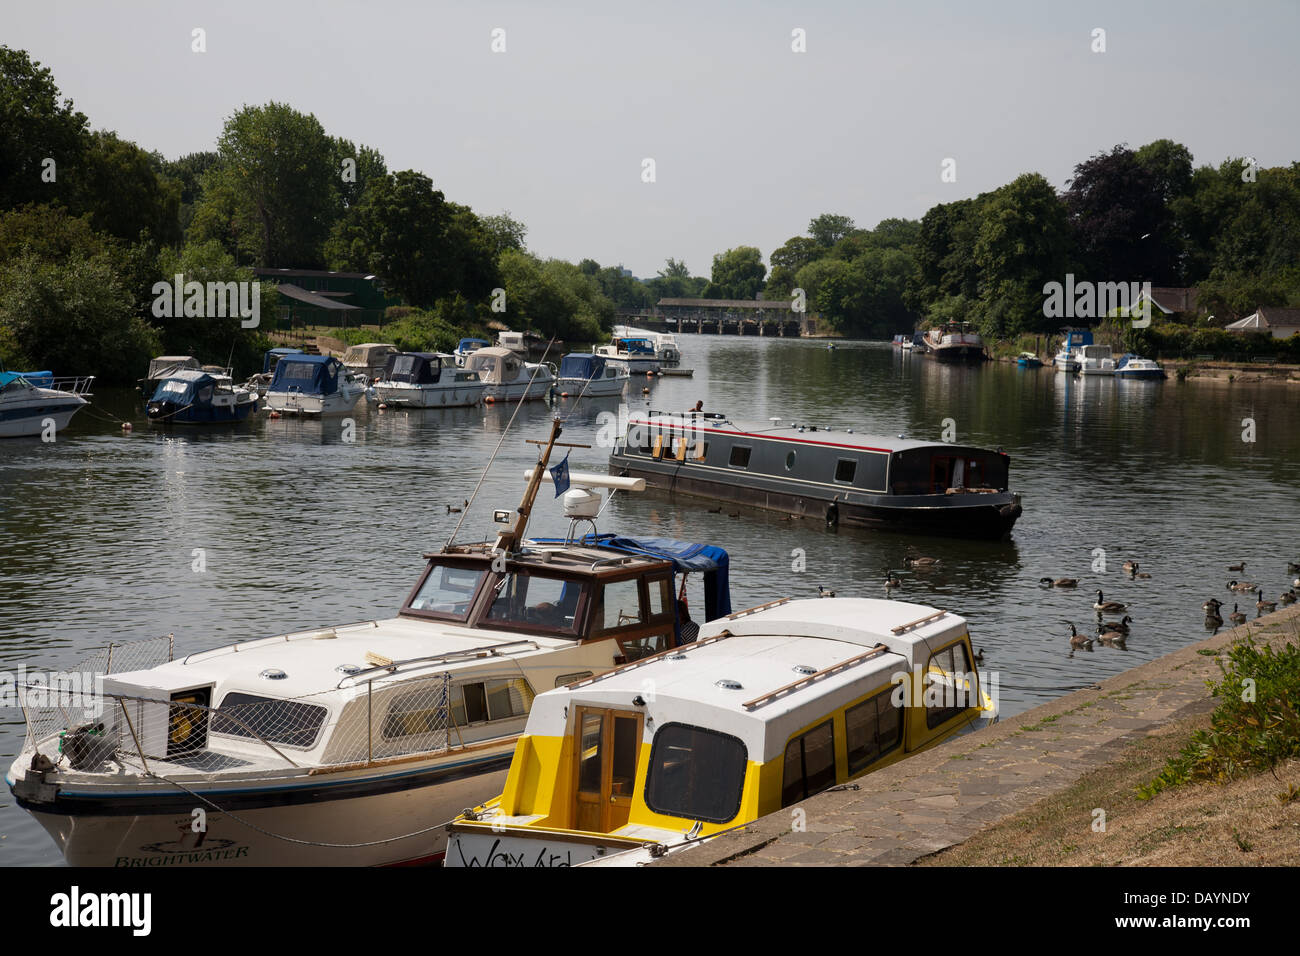 View of the river Thames on a hot summers day from the river bank at Sunbury on Thames. Stock Photo